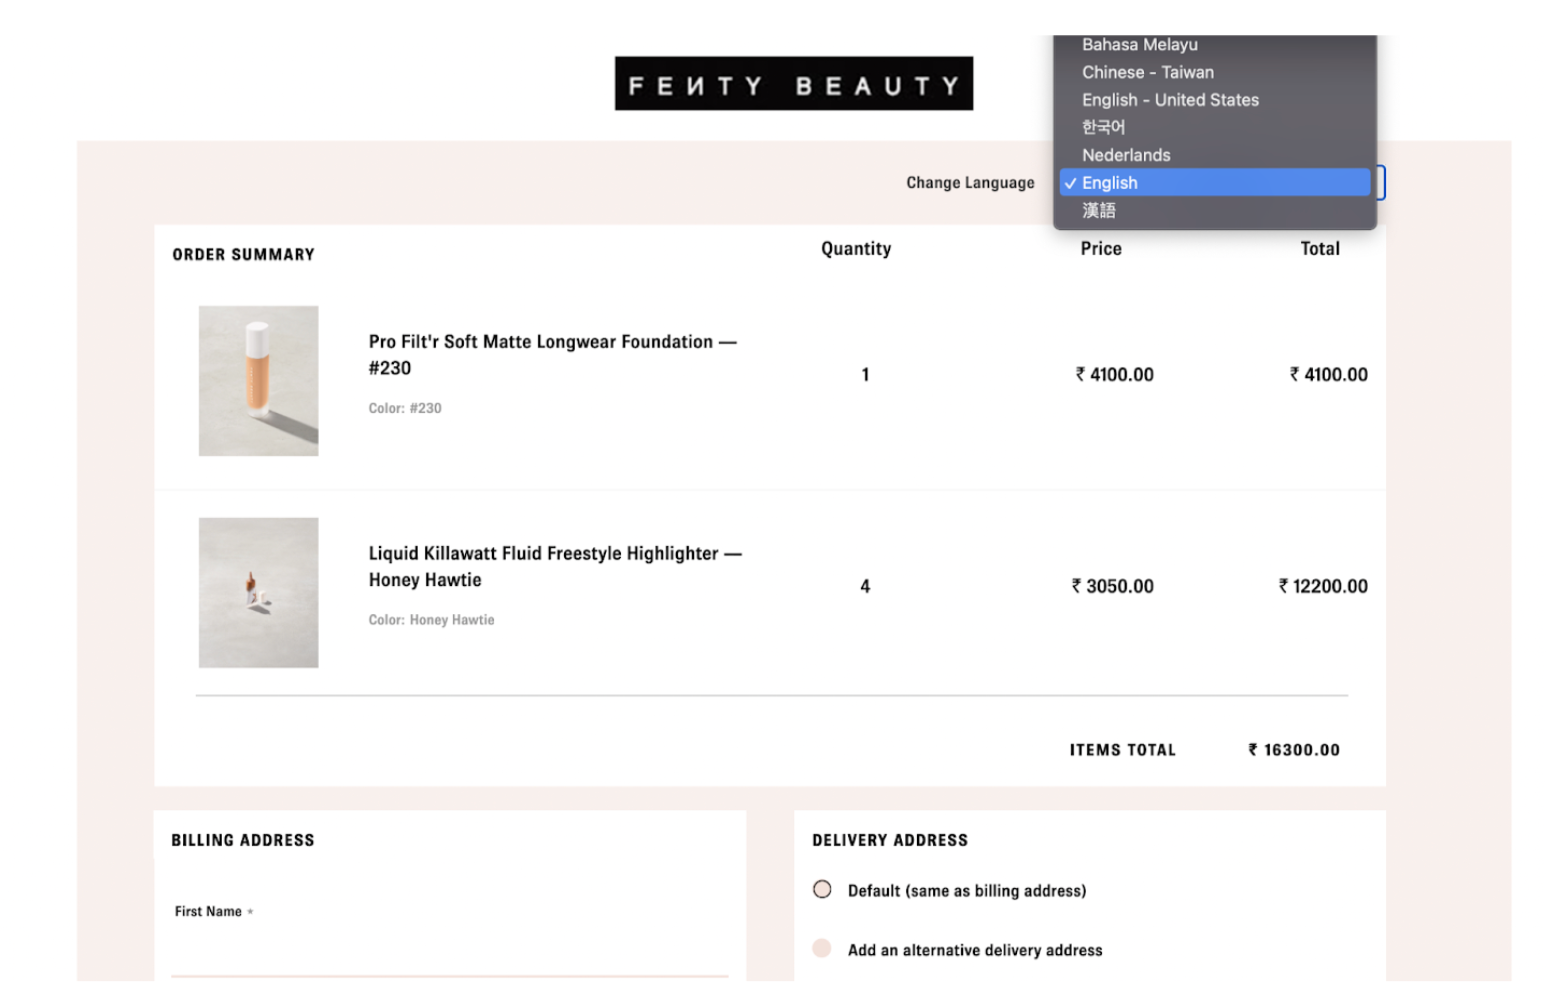 Wednesday Agency Projects - Fenty Beauty - Campaign and Website Design